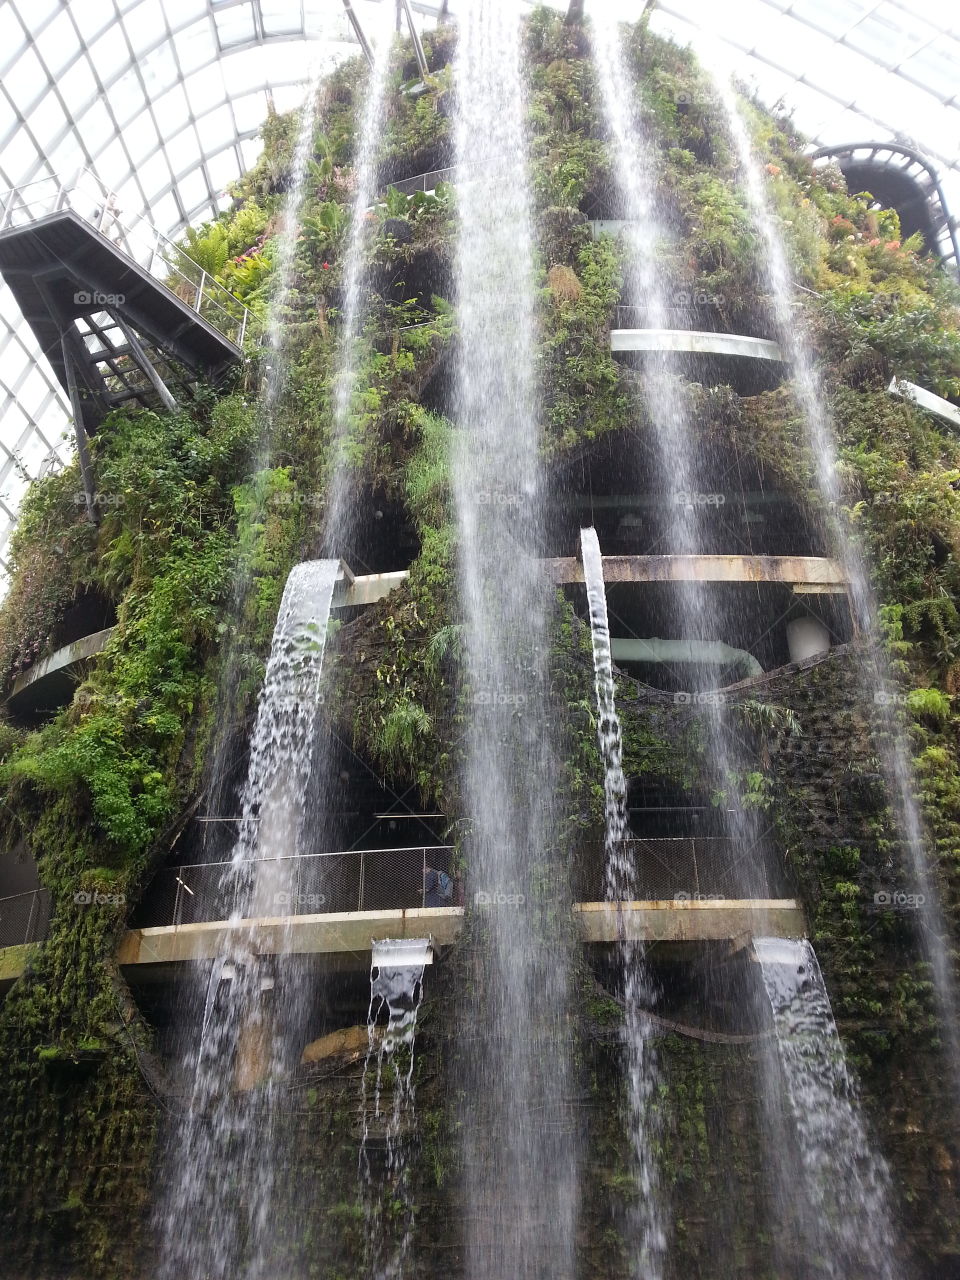 World's tallest indoor waterfall, Garden By The Bay, Singapore